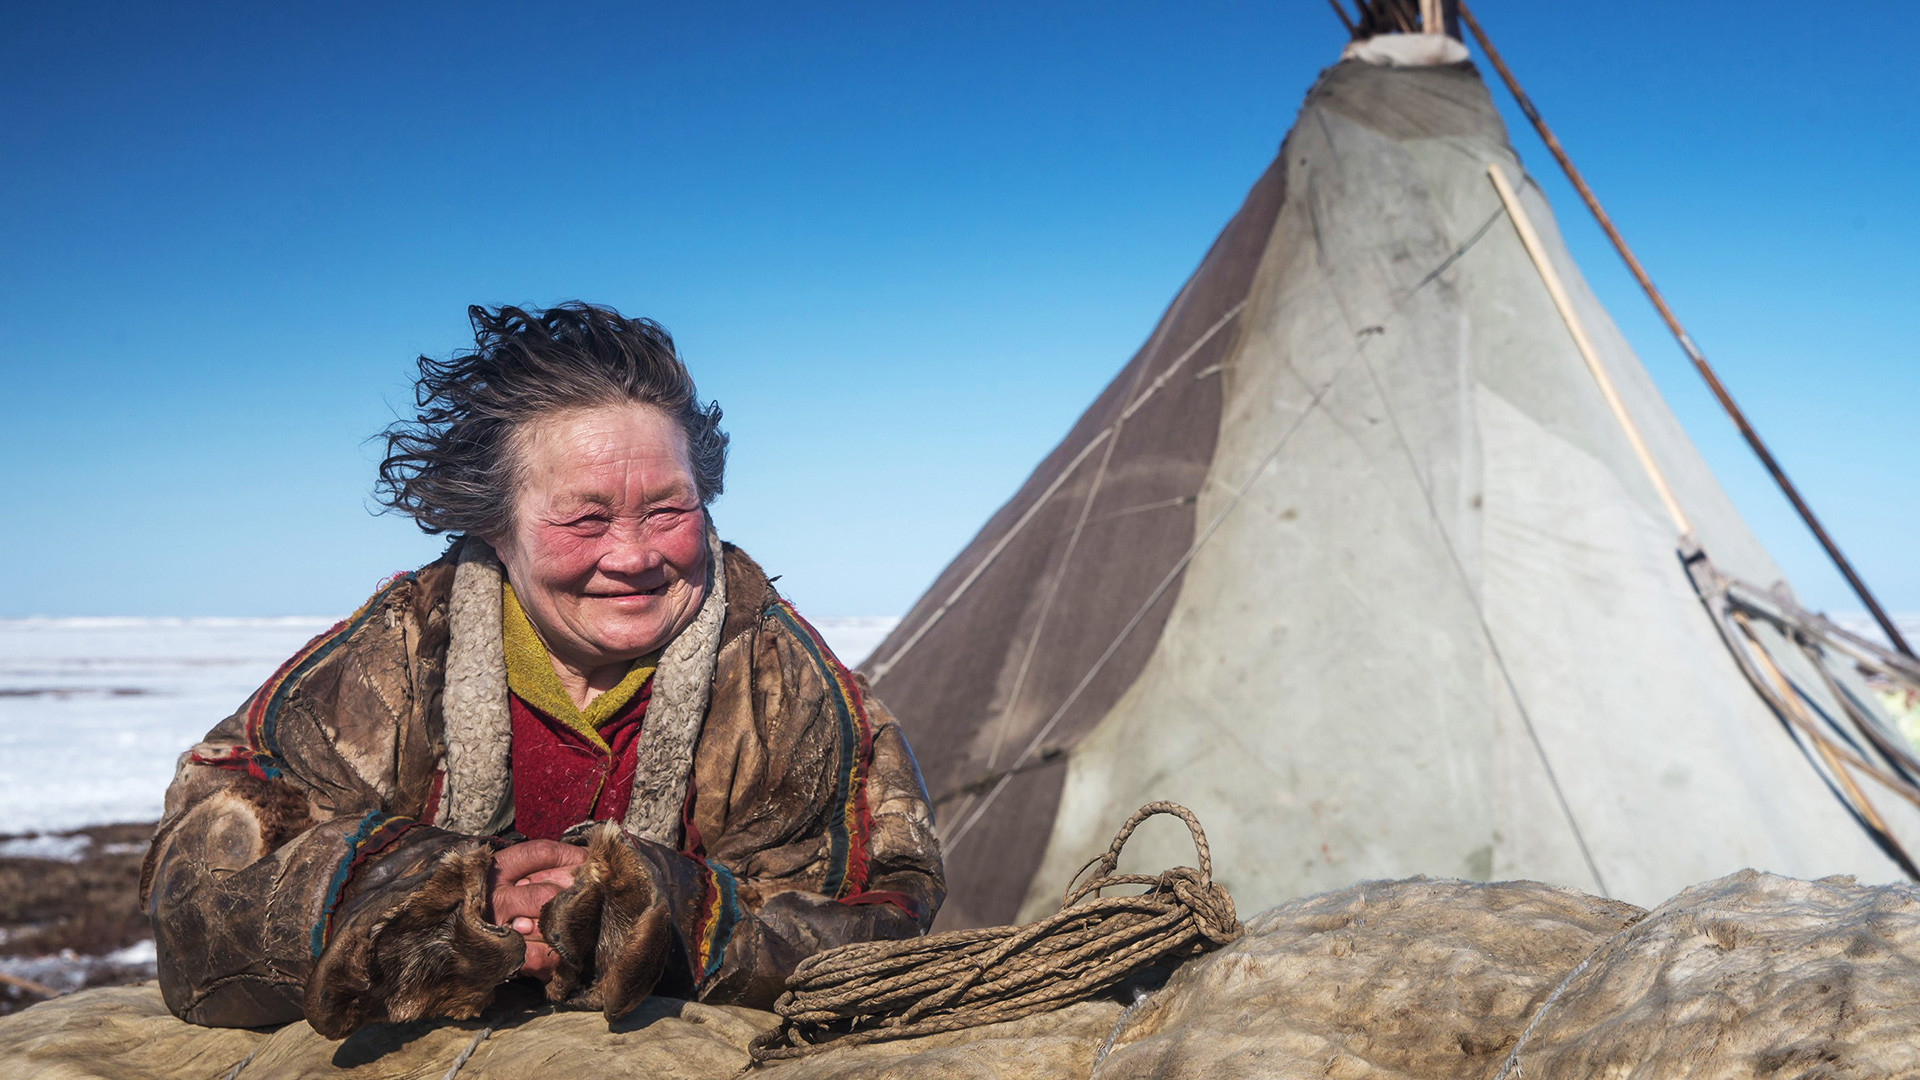 A reindeer herder women looks on at a nomad camp at 150 km from the town of Salekhard, Yamalo-Nenets Autonomous Okrug, May 2, 2016. 